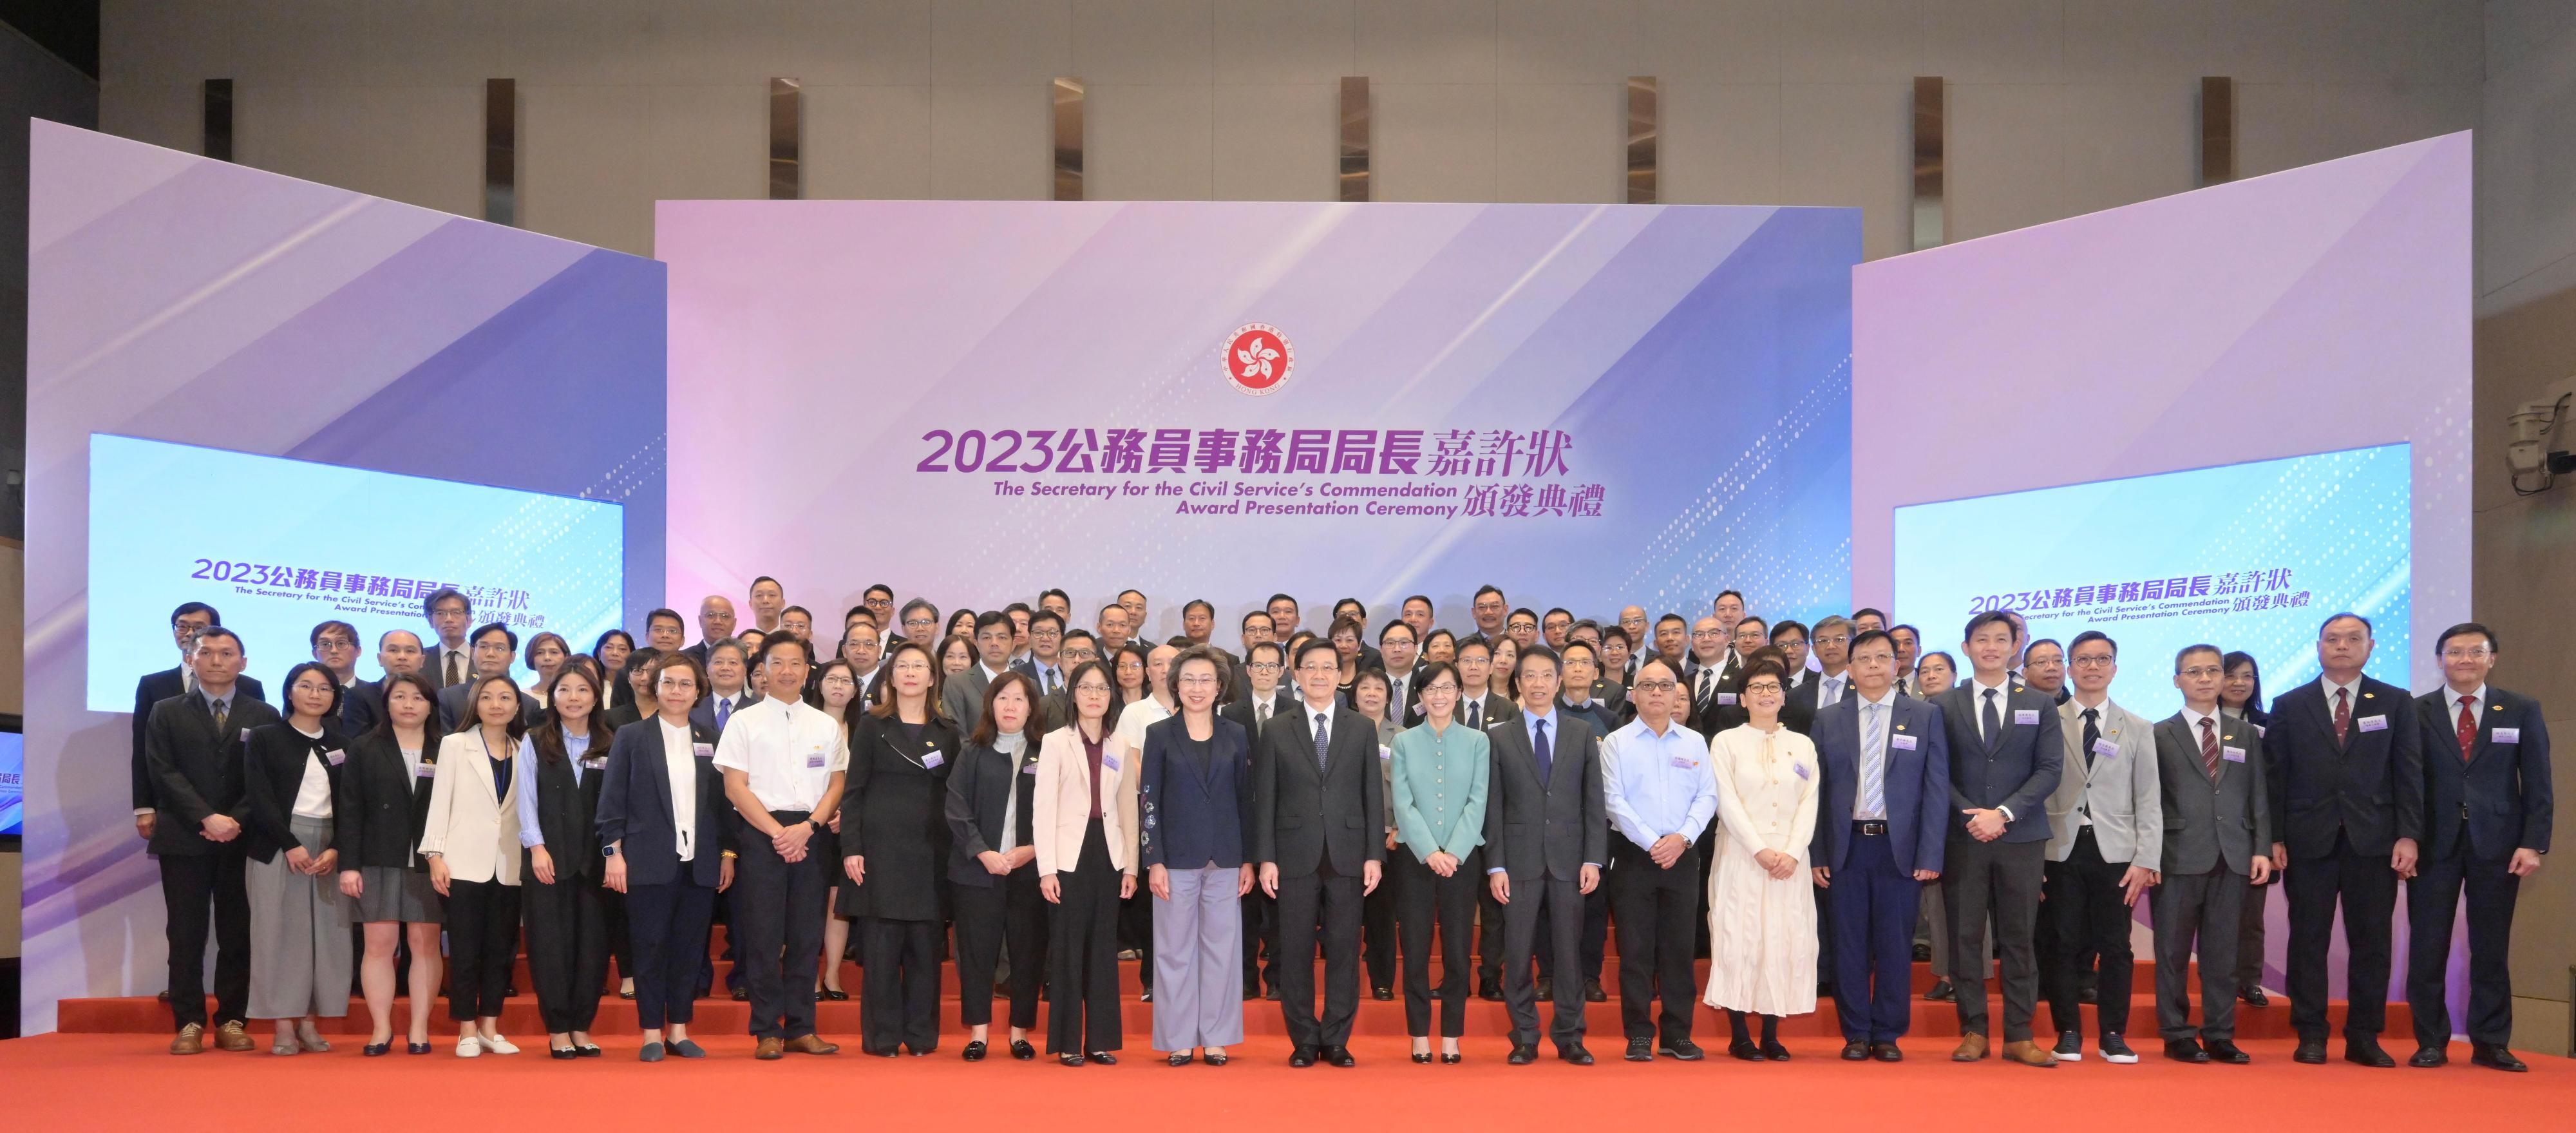 The Chief Executive, Mr John Lee, attended the Secretary for the Civil Service's Commendation Award Presentation Ceremony 2023 at the Central Government Offices today (November 28). Photo shows Mr Lee (first row, 11th right); the Secretary for the Civil Service, Mrs Ingrid Yeung (first row, 11th left); the Chairman of the Public Service Commission, Ms Maisie Cheng (first row, 10th right); and the Permanent Secretary for the Civil Service, Mr Clement Leung (first row, ninth right), with some of the award recipients.
